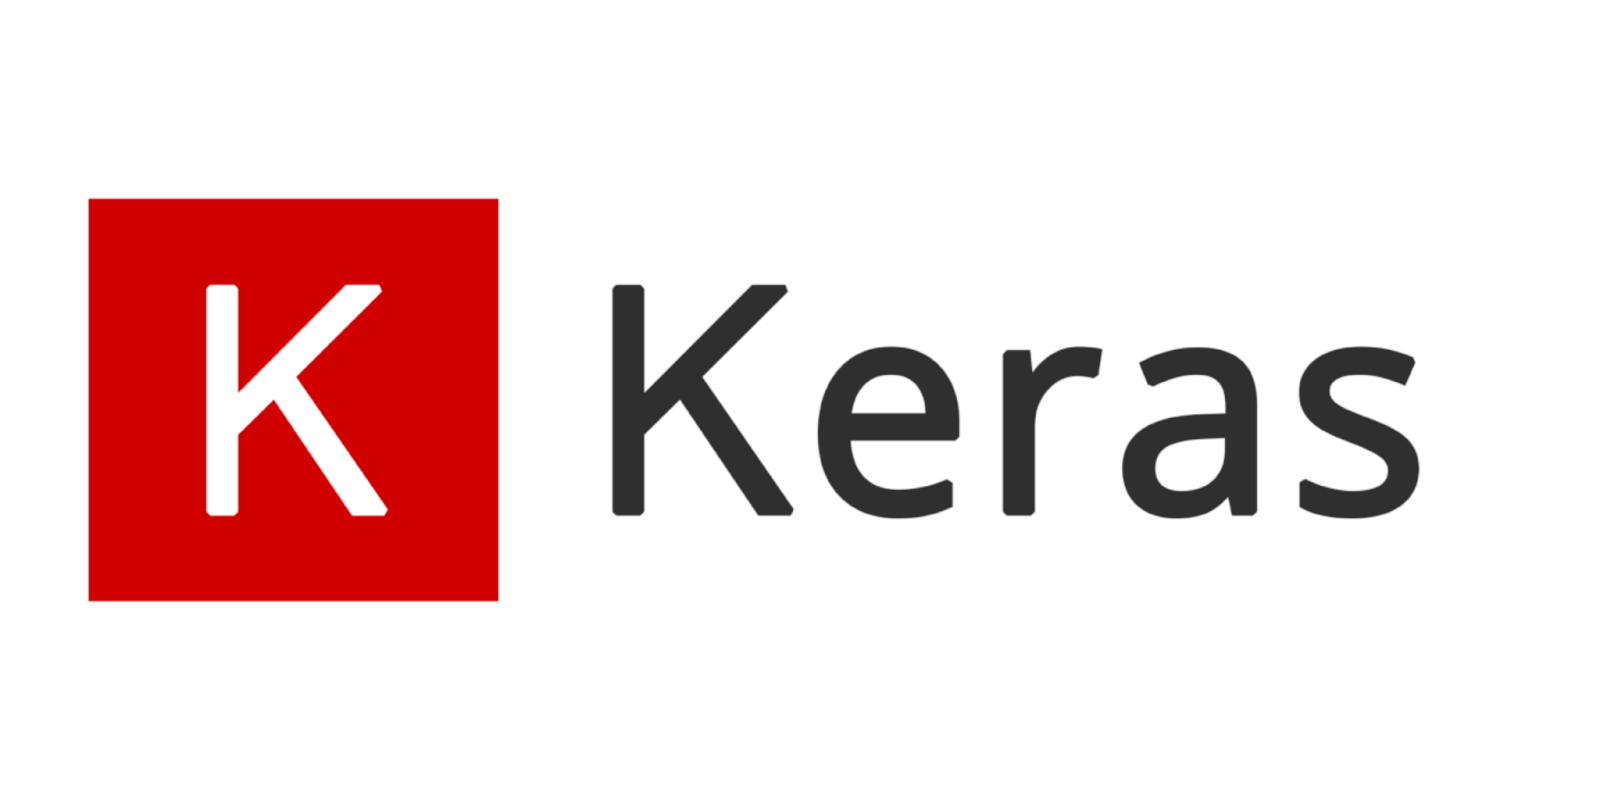 What Is Keras